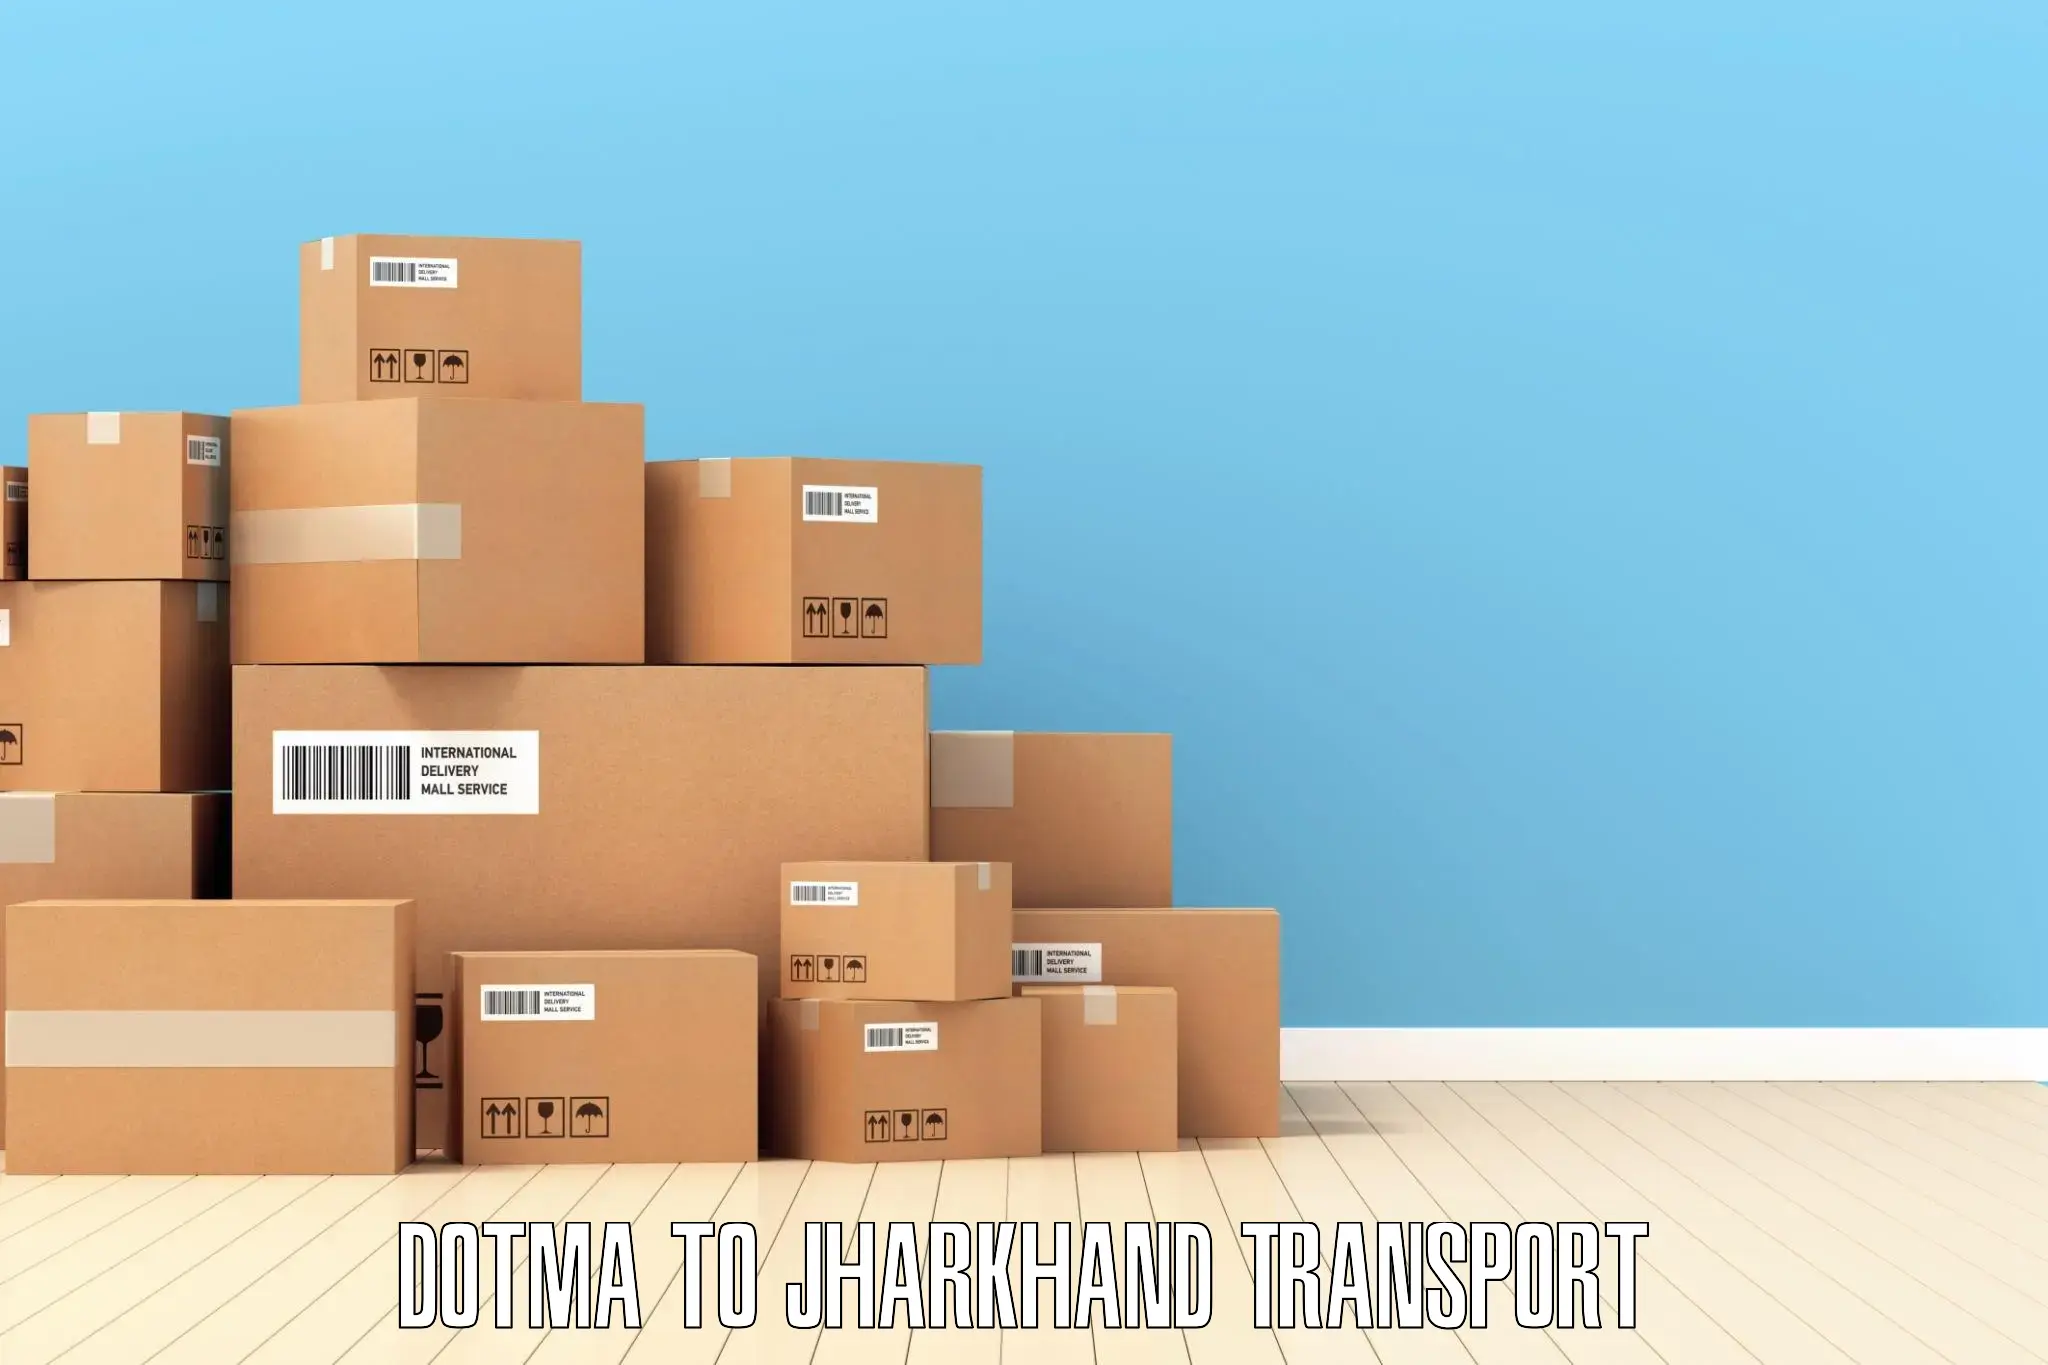 Domestic goods transportation services Dotma to Chouparan